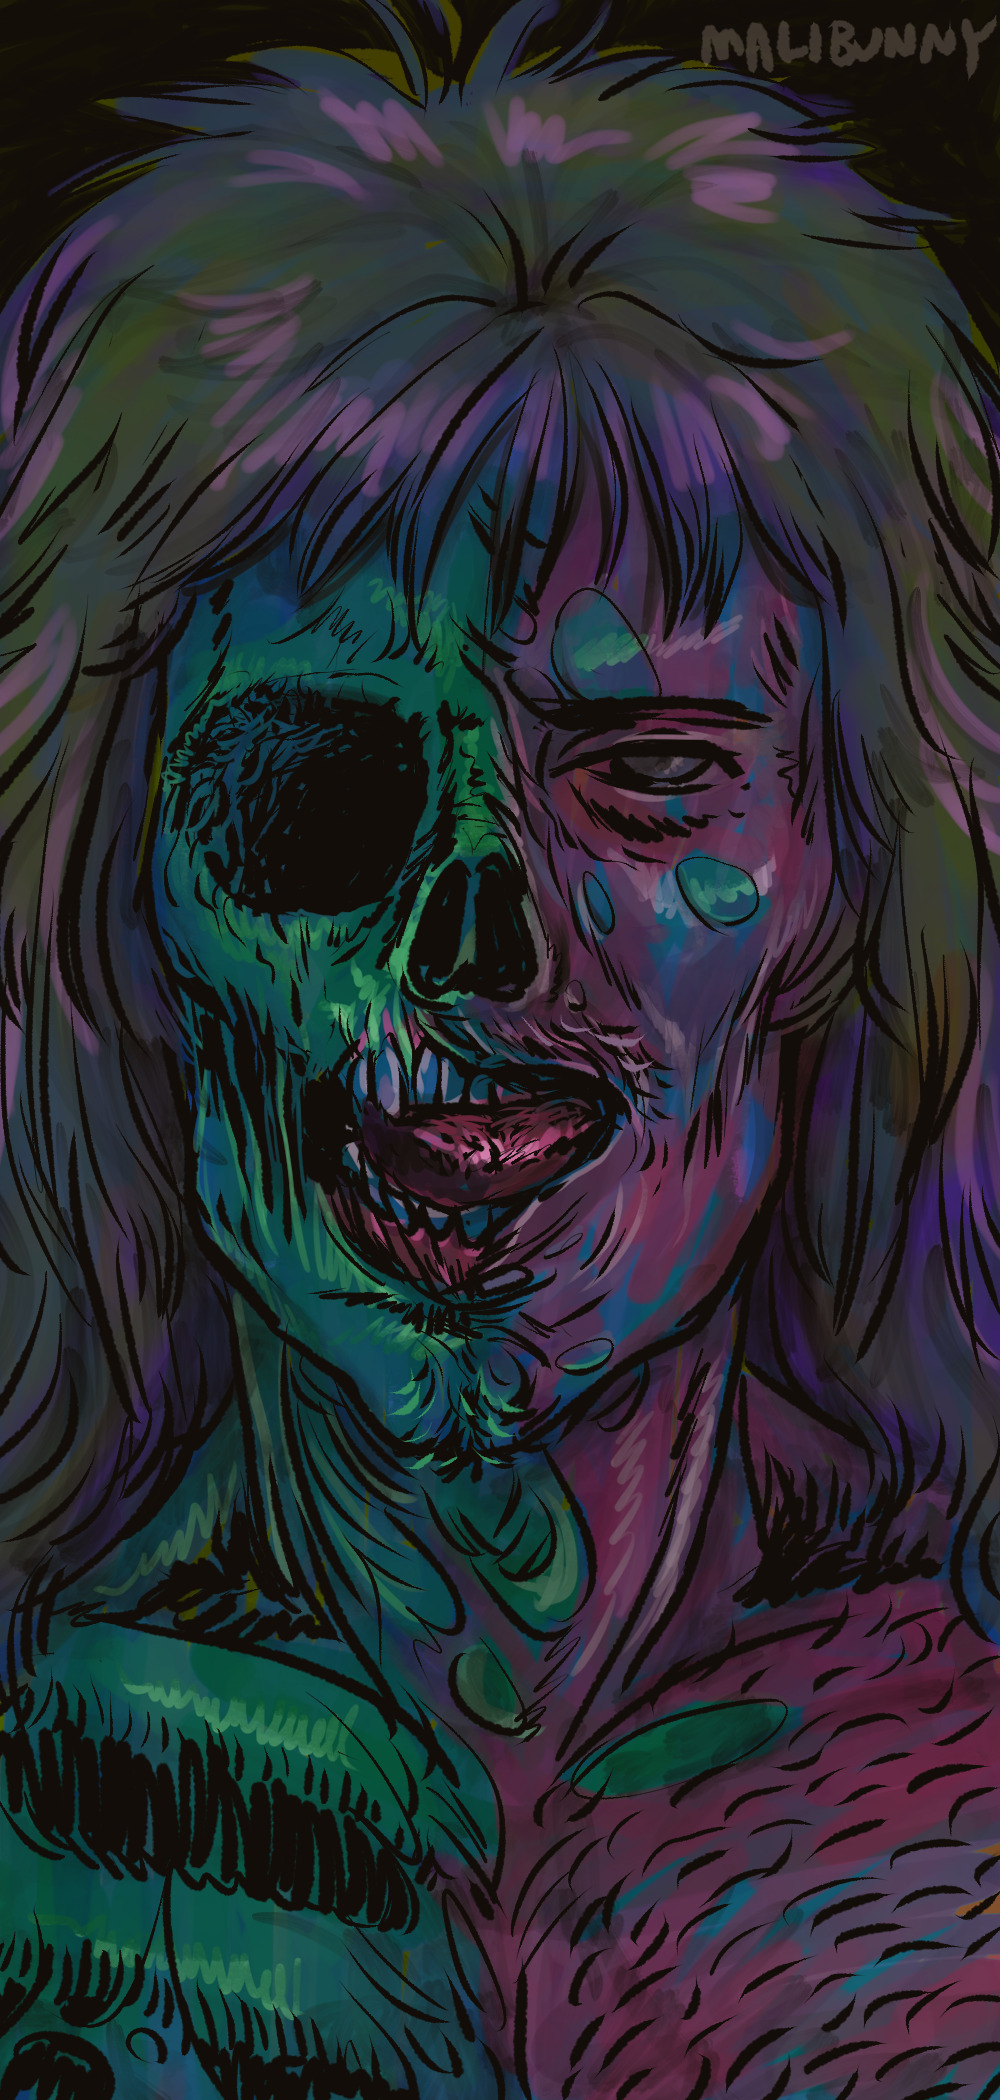 Digital drawing of a zombie's face. It looks like an early 80s glam-rocker with skin missing and a big mullet-esque haircut